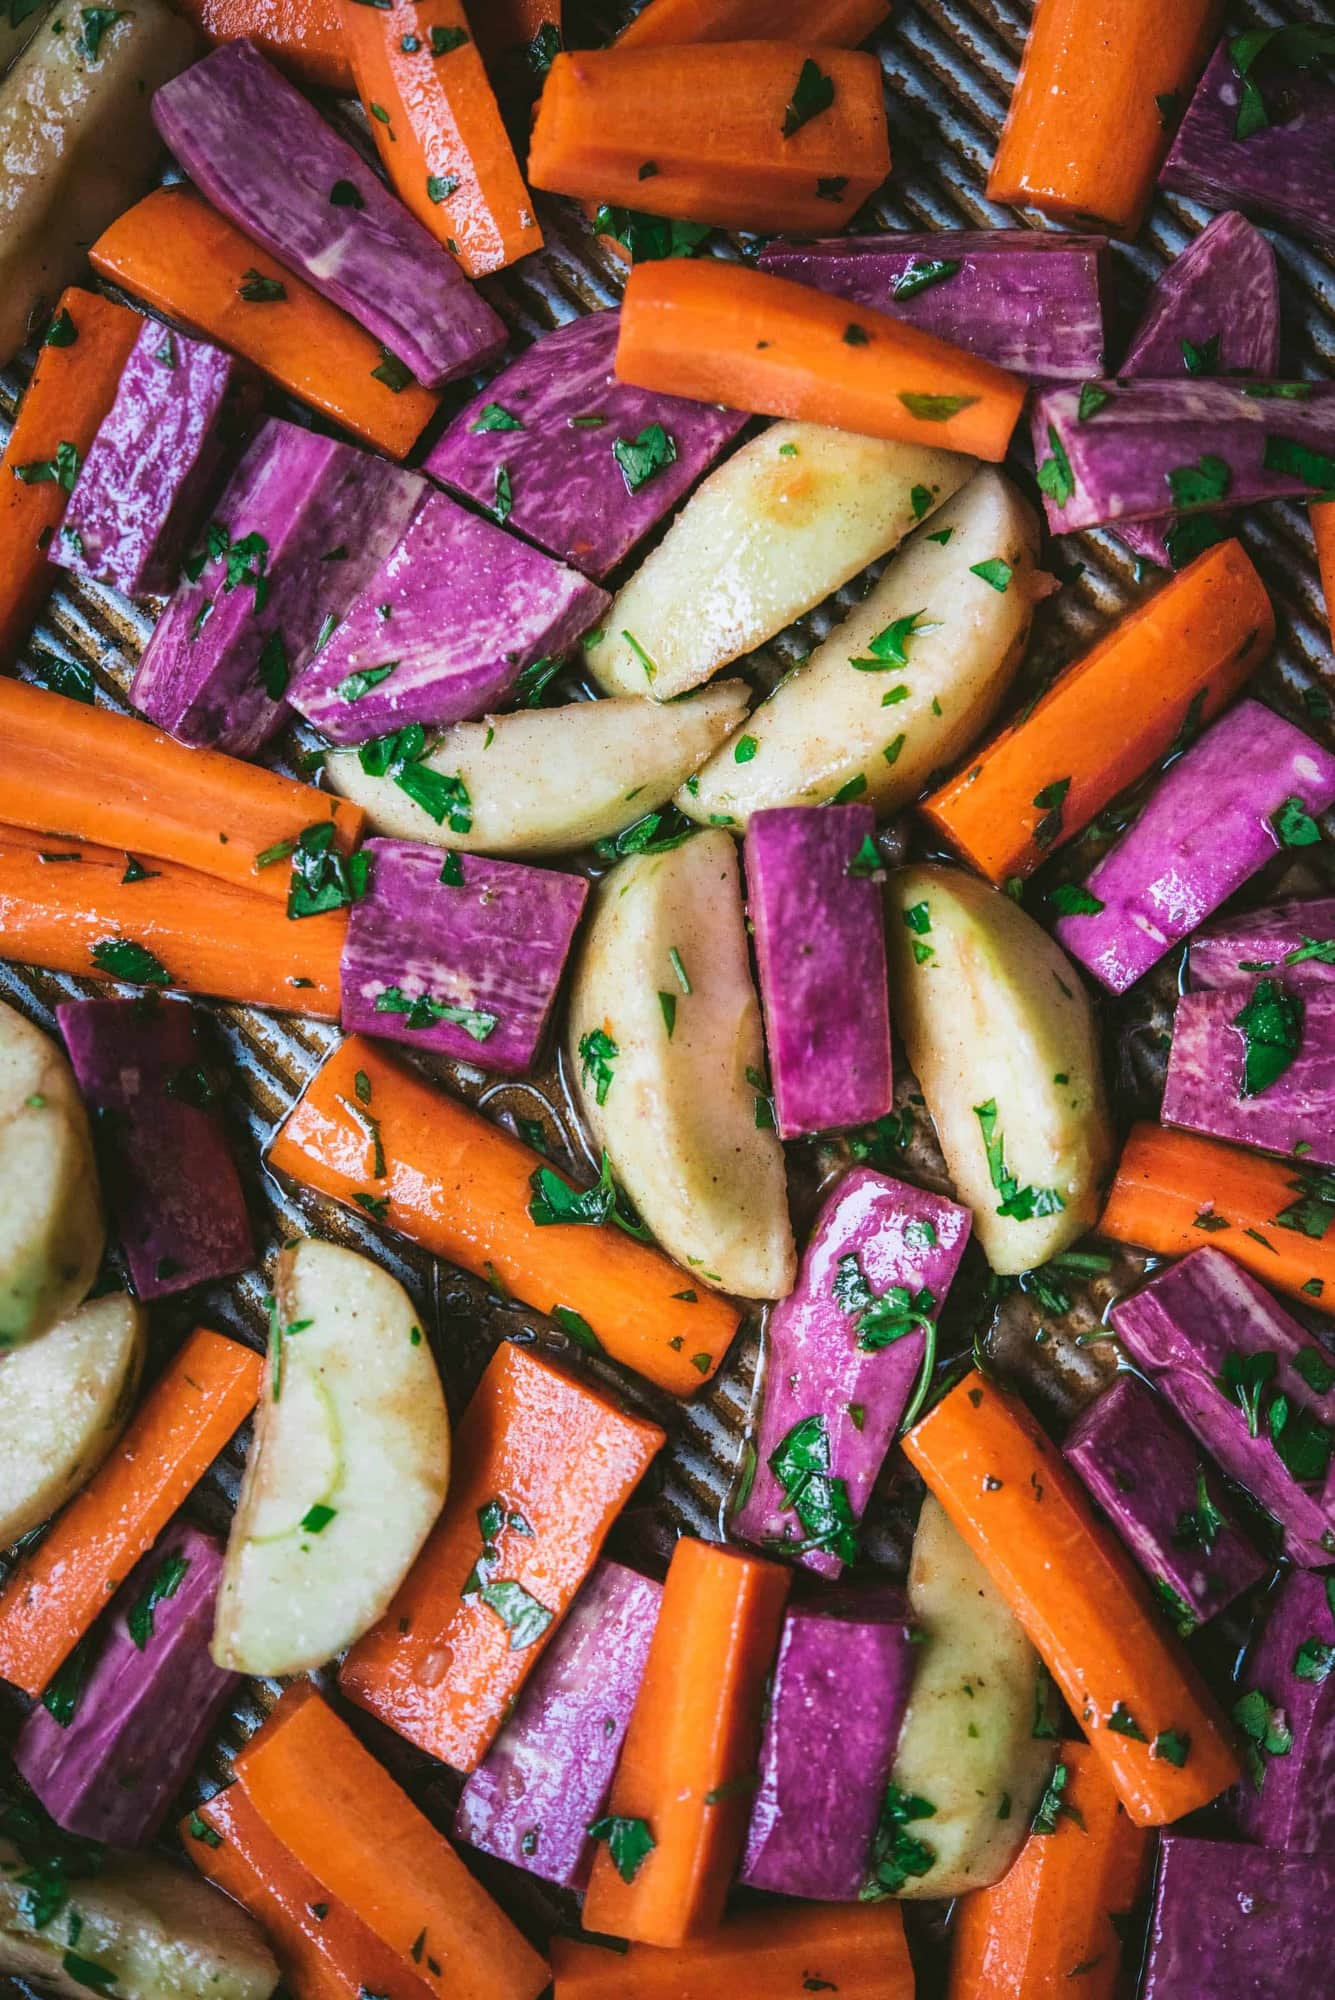 Close up of carrots, apples and purple sweet potatoes before roasting on baking sheet